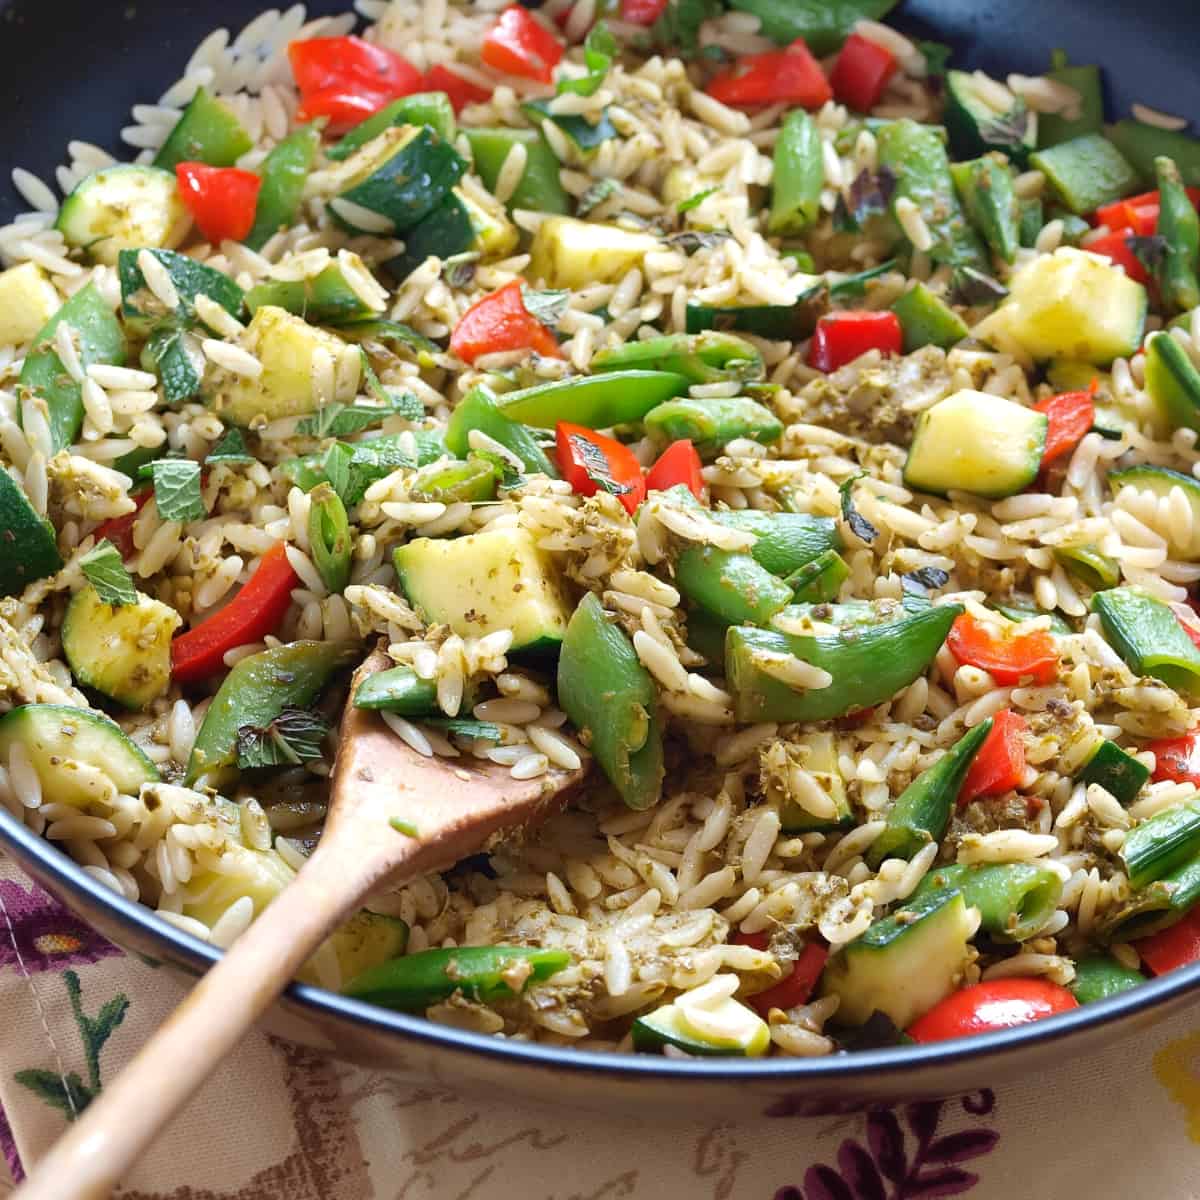 A skillet filled with orzo pasta and chopped vegetables.